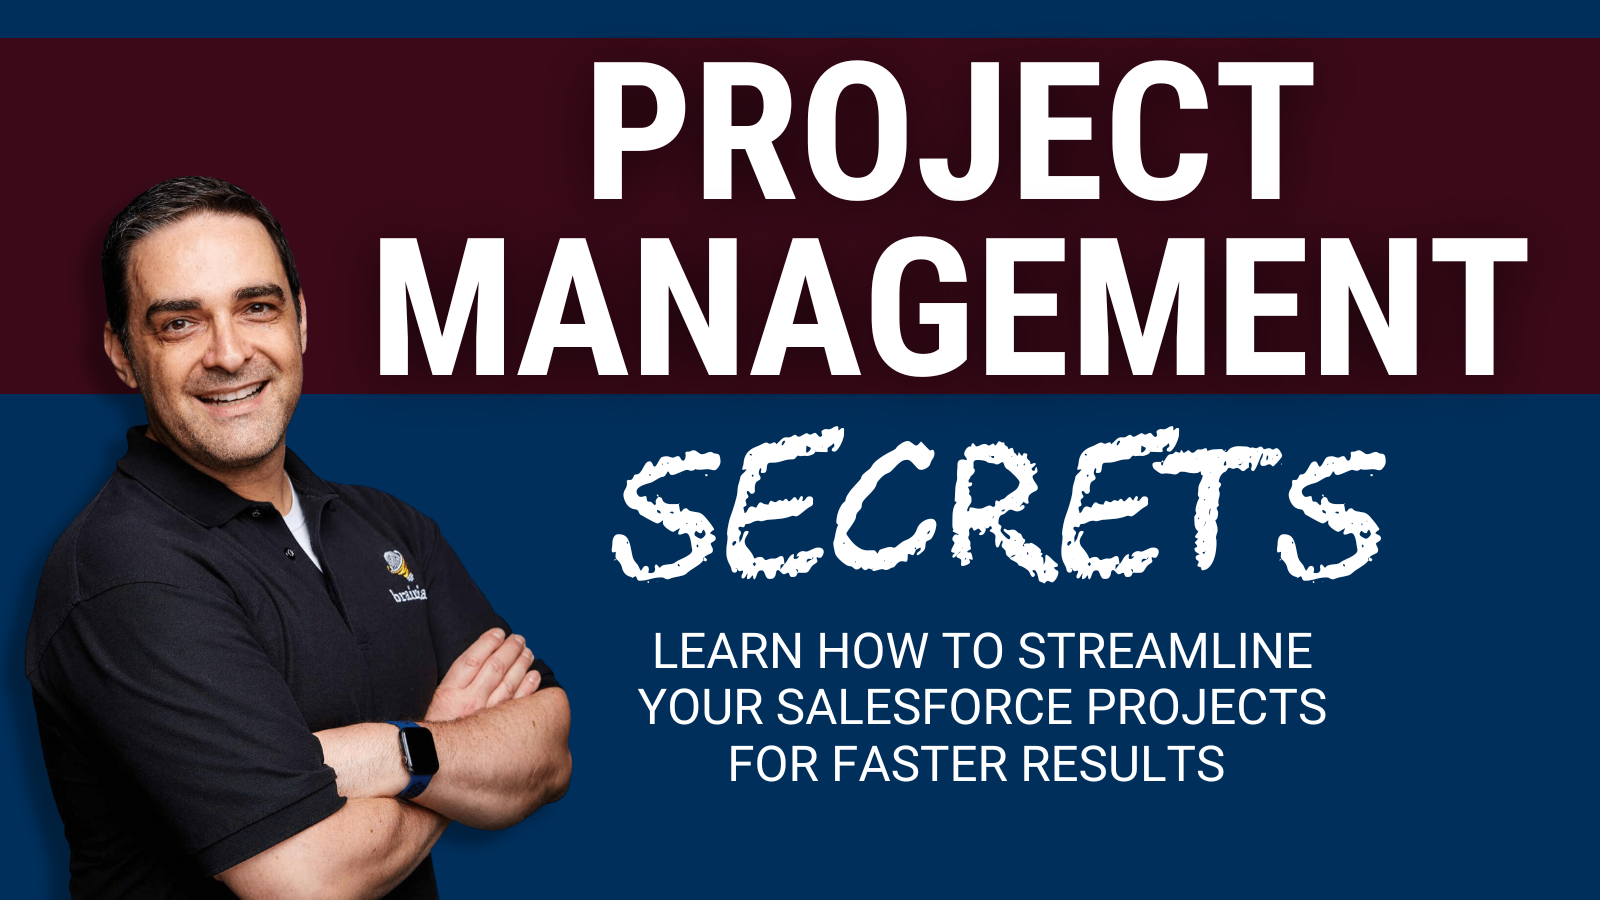 Learn everything you need to know about successfully managing your Salesforce projects, from gathering business requirements to UAT testing.